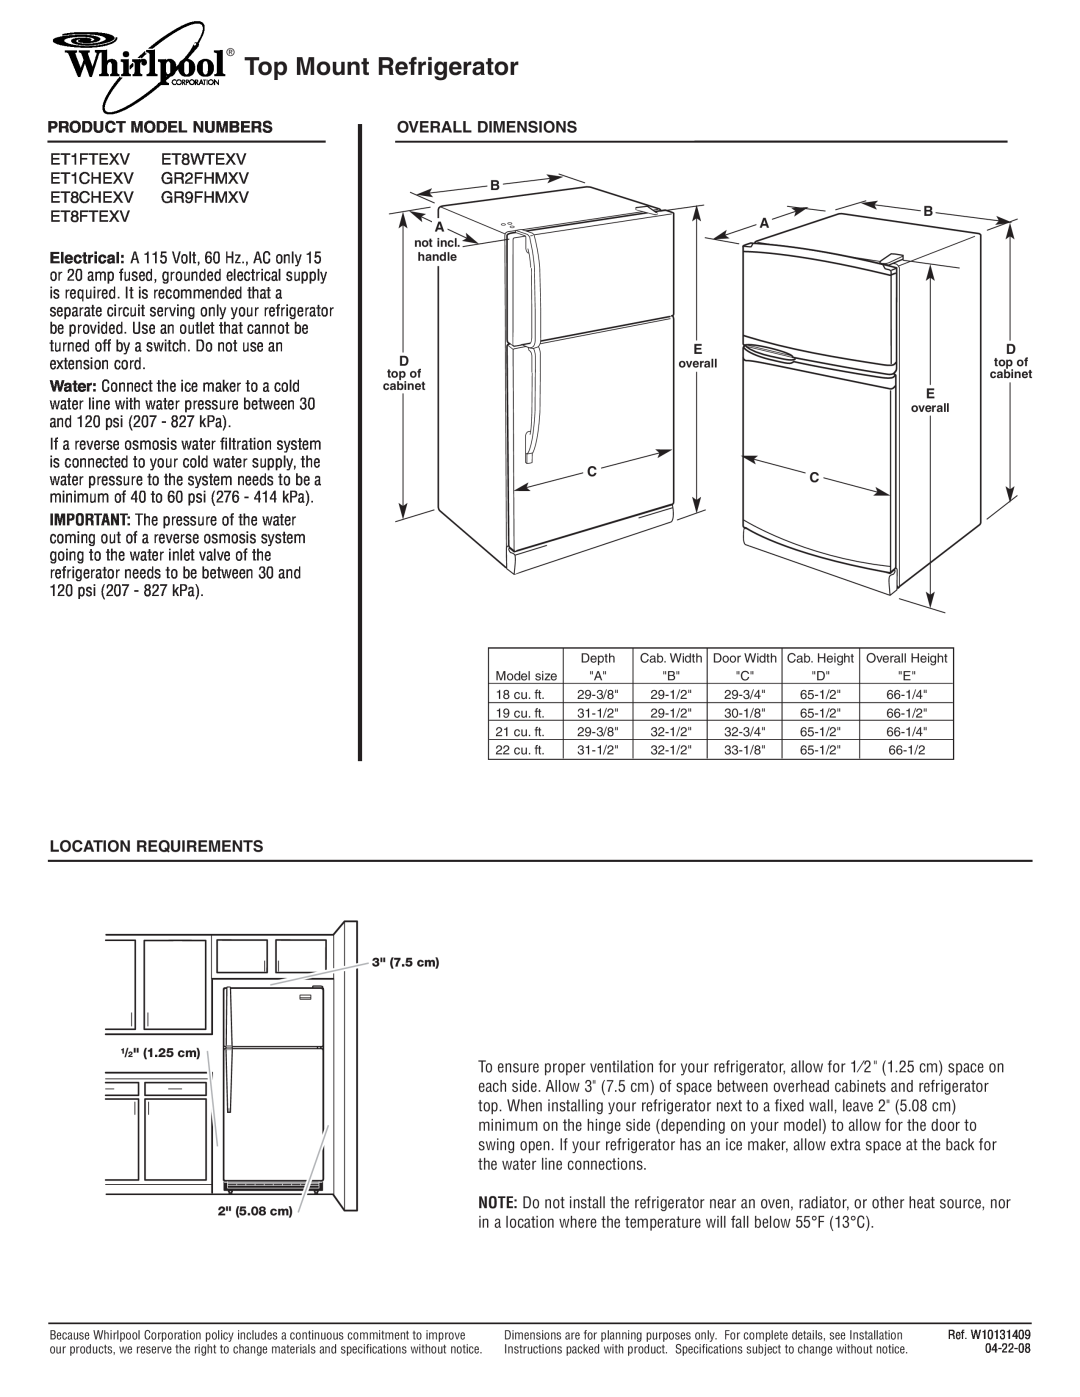 Whirlpool ET8WTEXV dimensions Top Mount Refrigerator, Product Model Numbers, Overall Dimensions, Location Requirements 